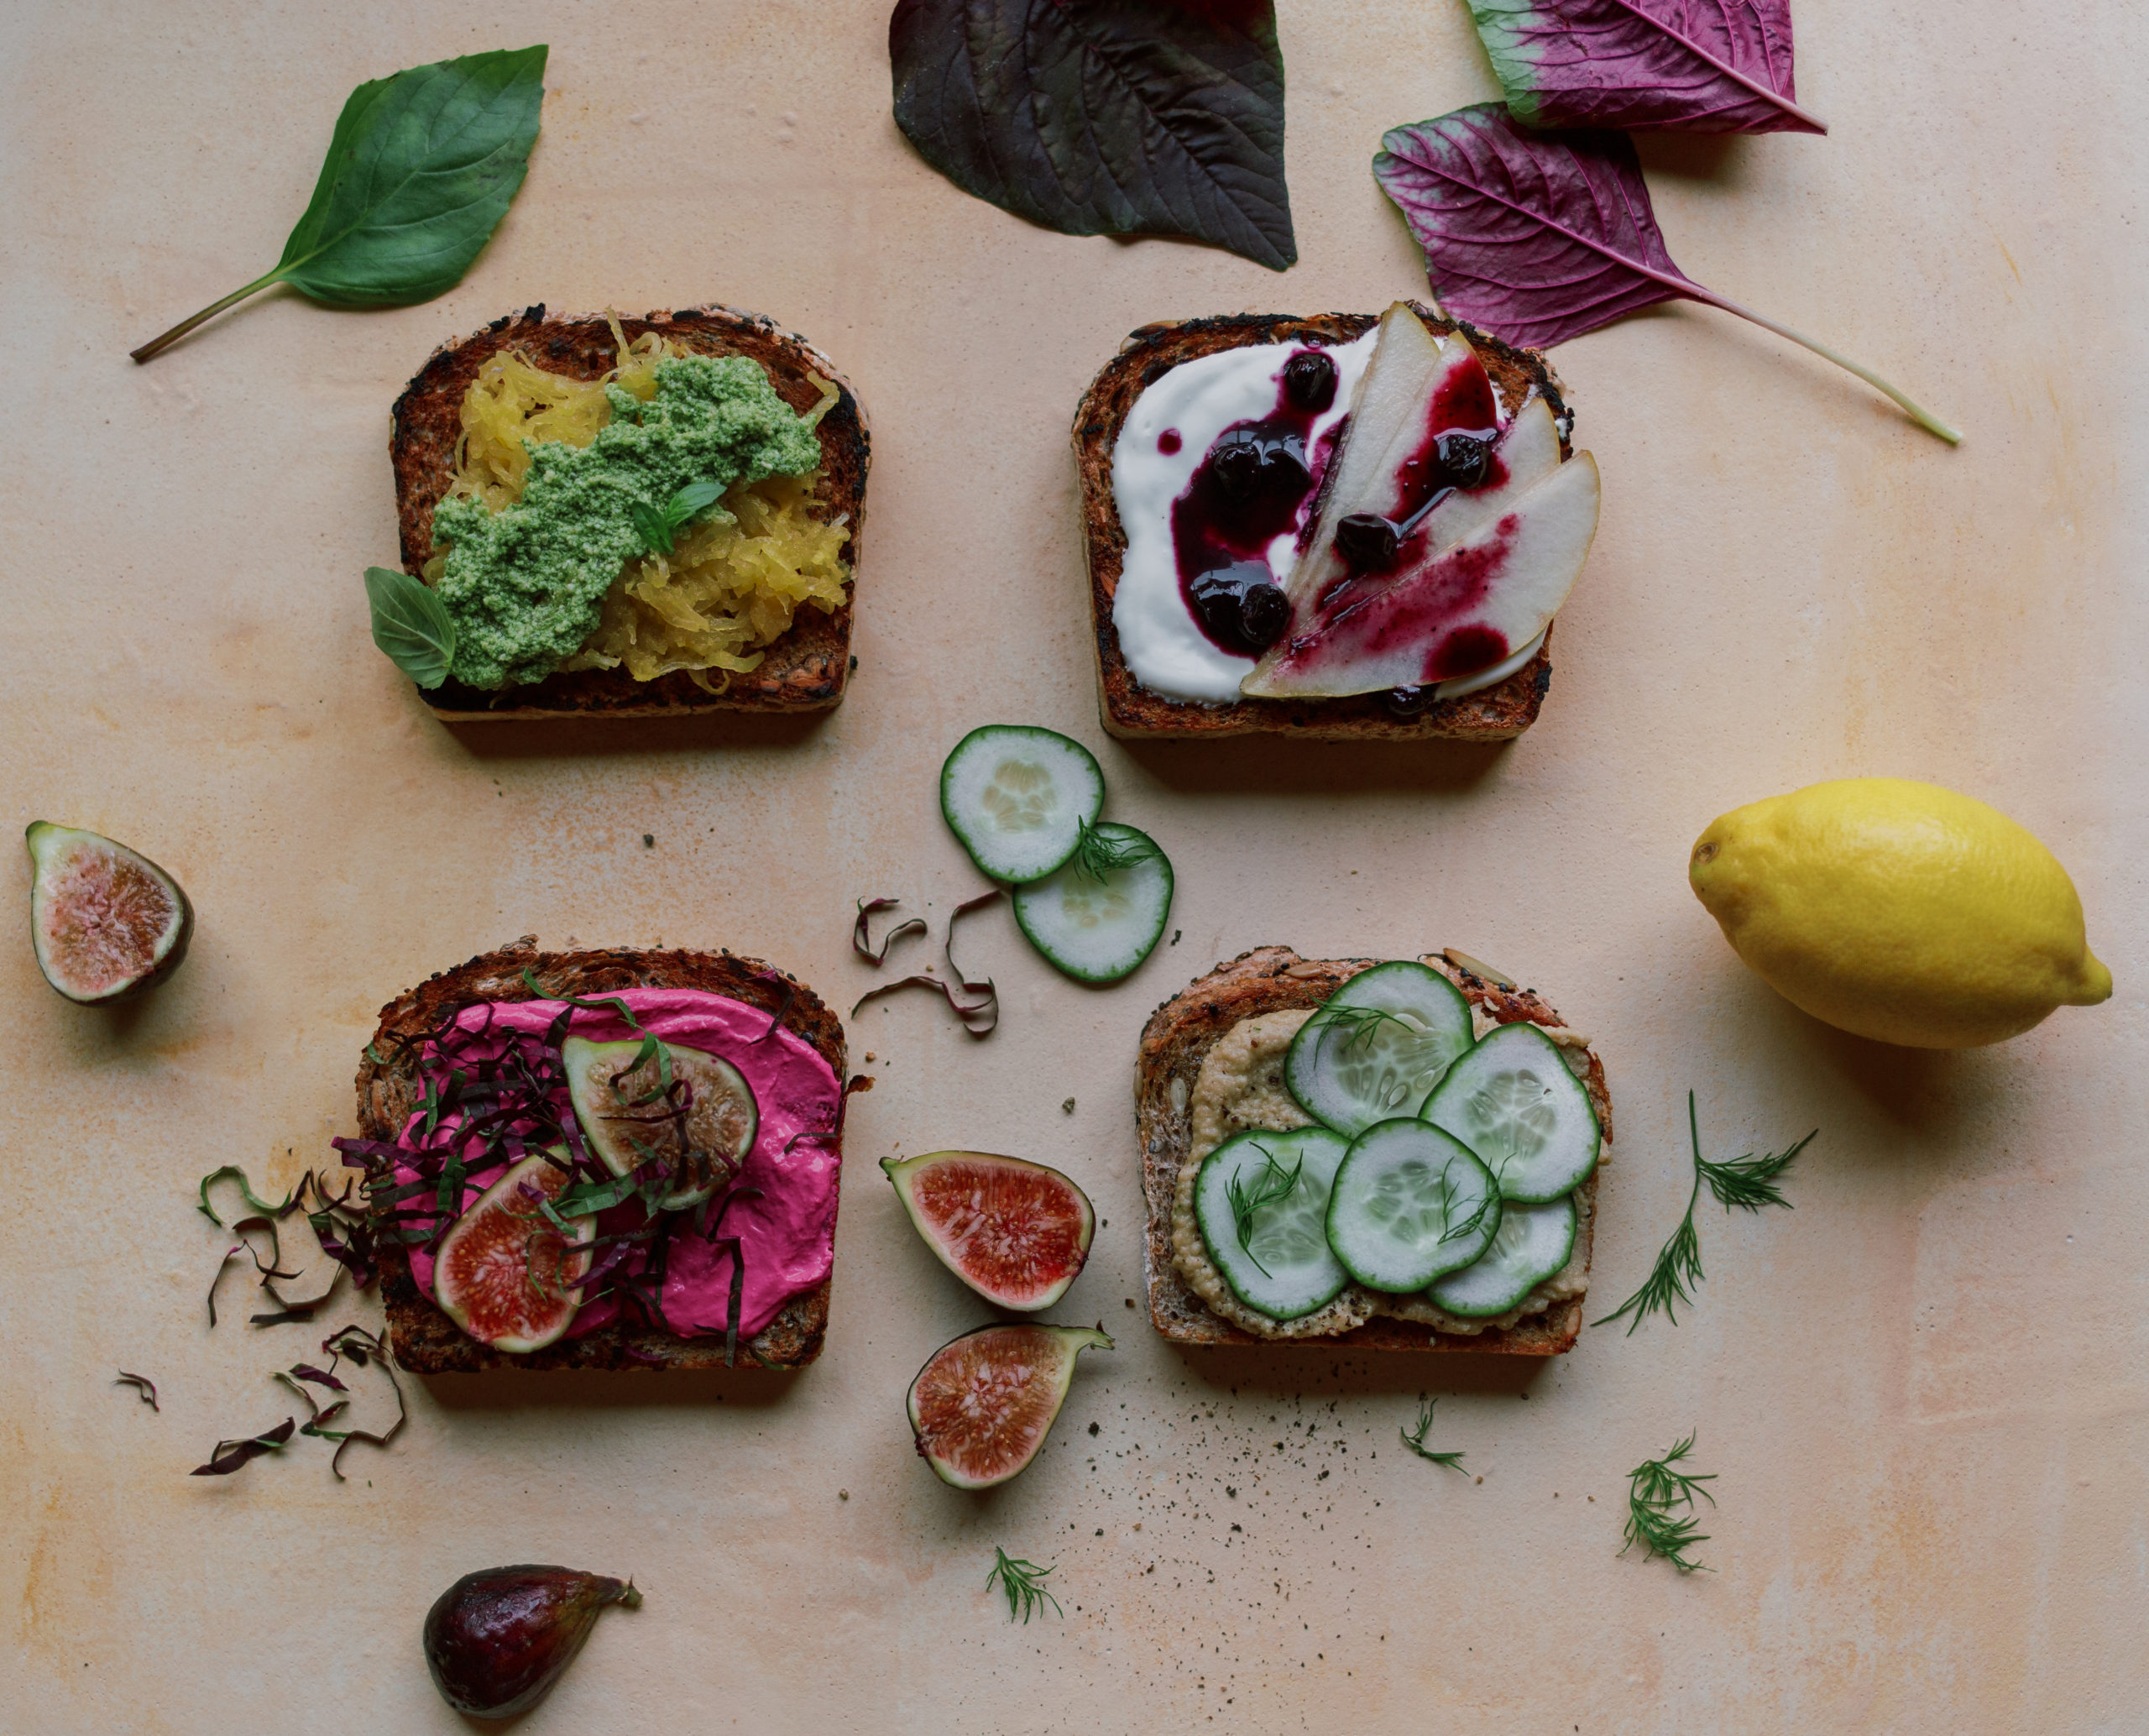 Open faced toasts medley including lemon dill hummus, goat cheese with beet juice and figs, vegan pesto, and tangy yogurt with blueberries and pears.